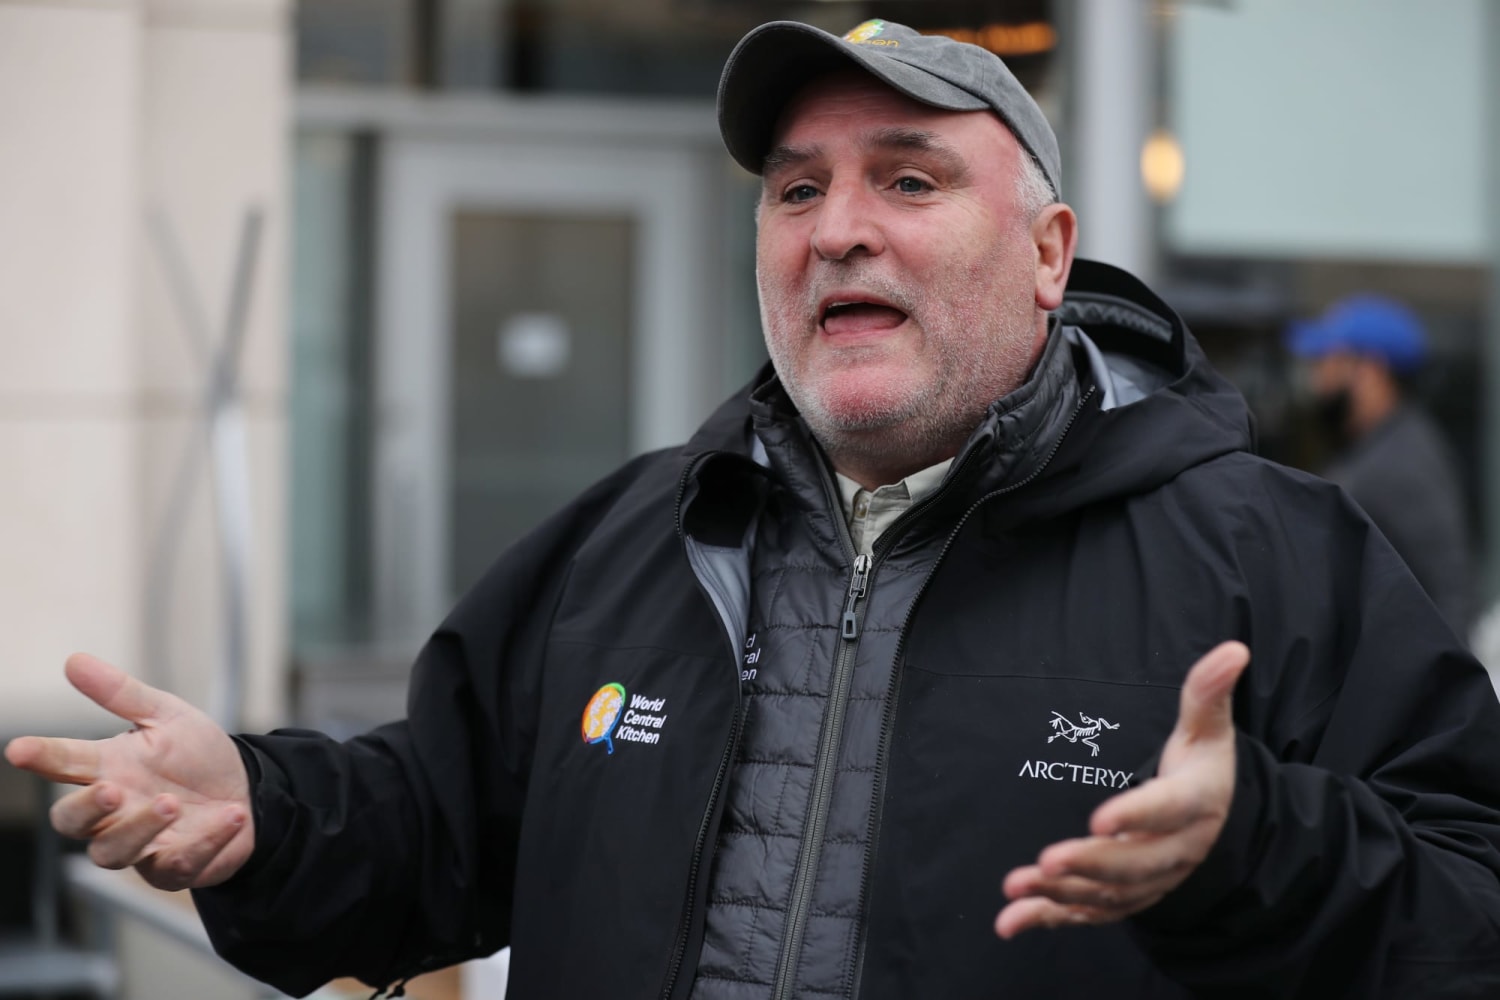 Jose Andres joins Learn on TikTok to share his cooking tips